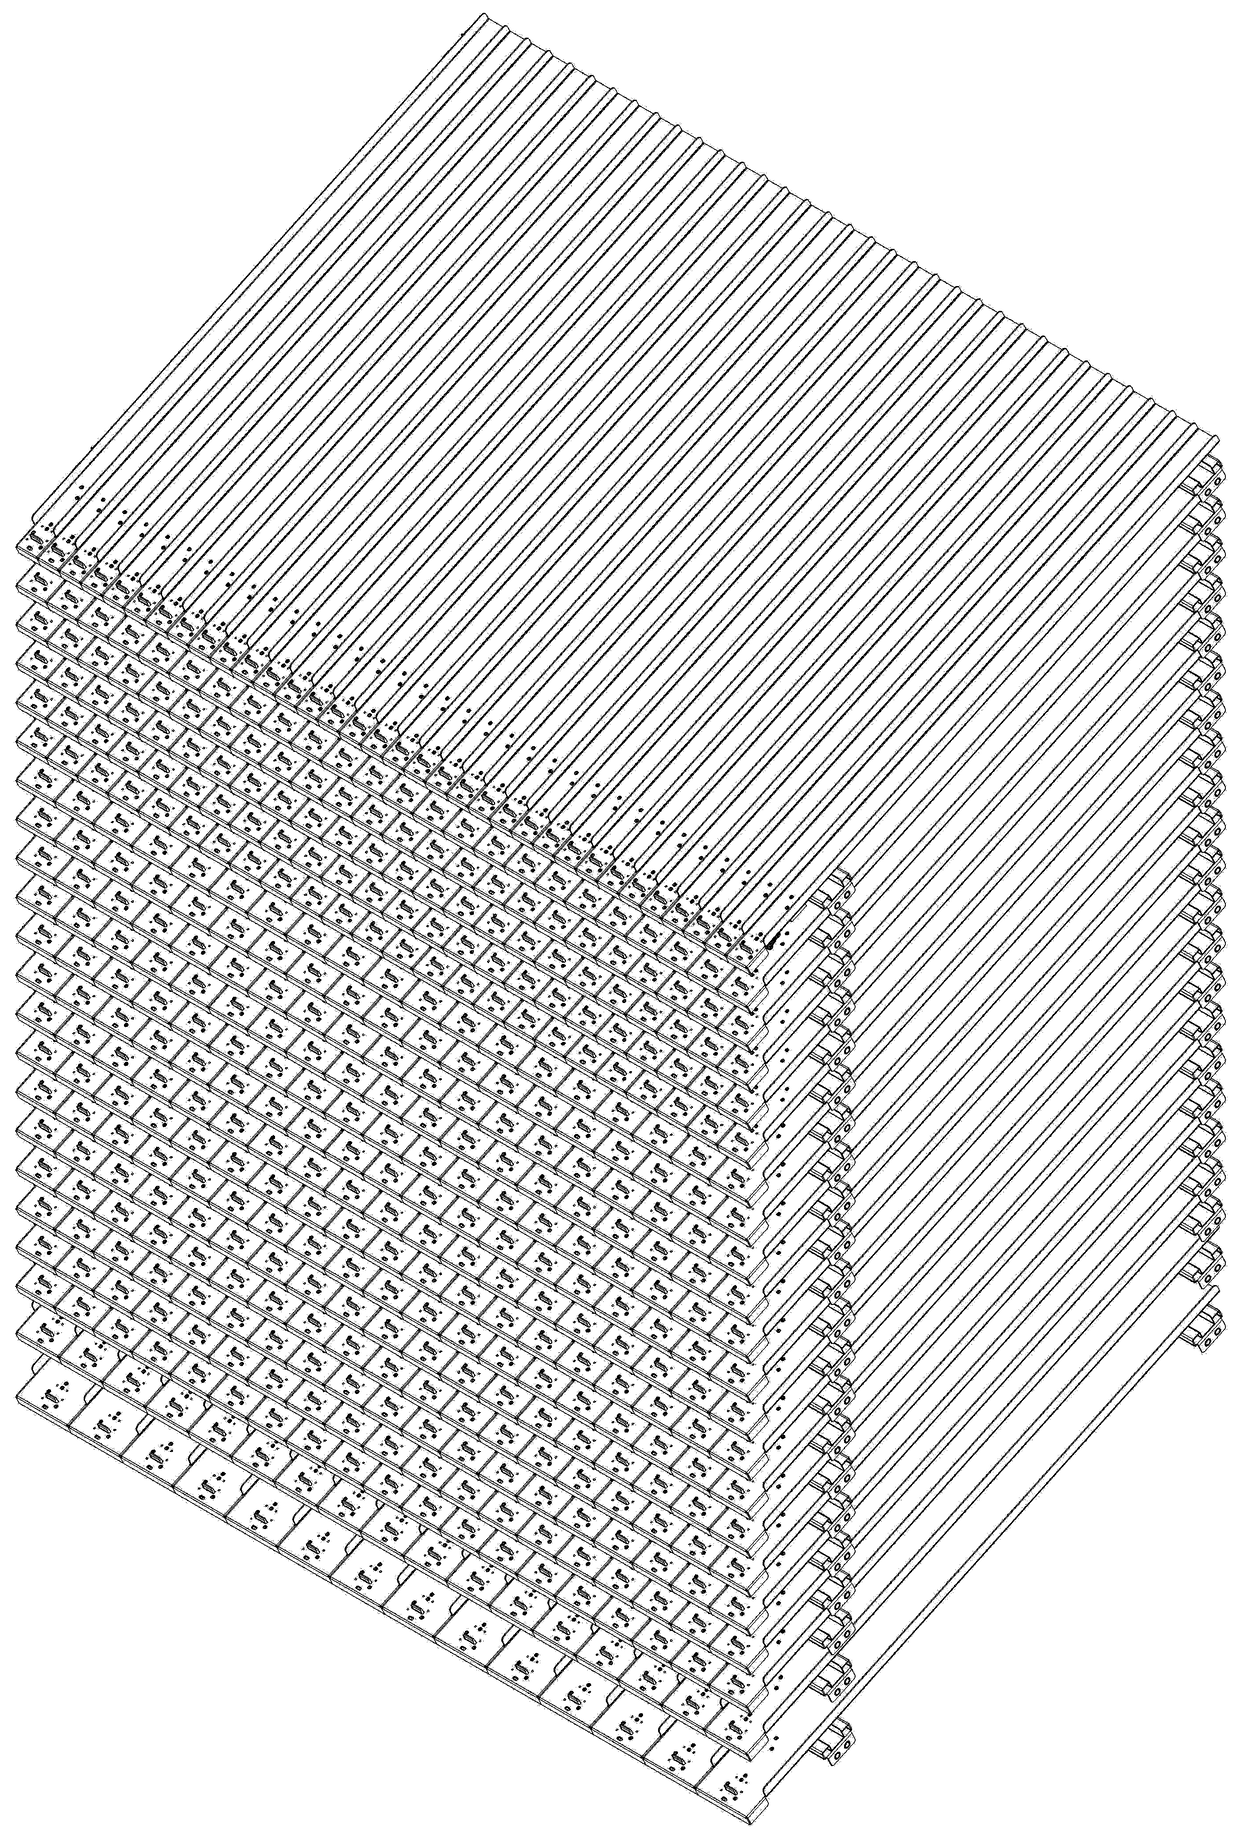 Drug storage storehouse system of cluster type array square grooves